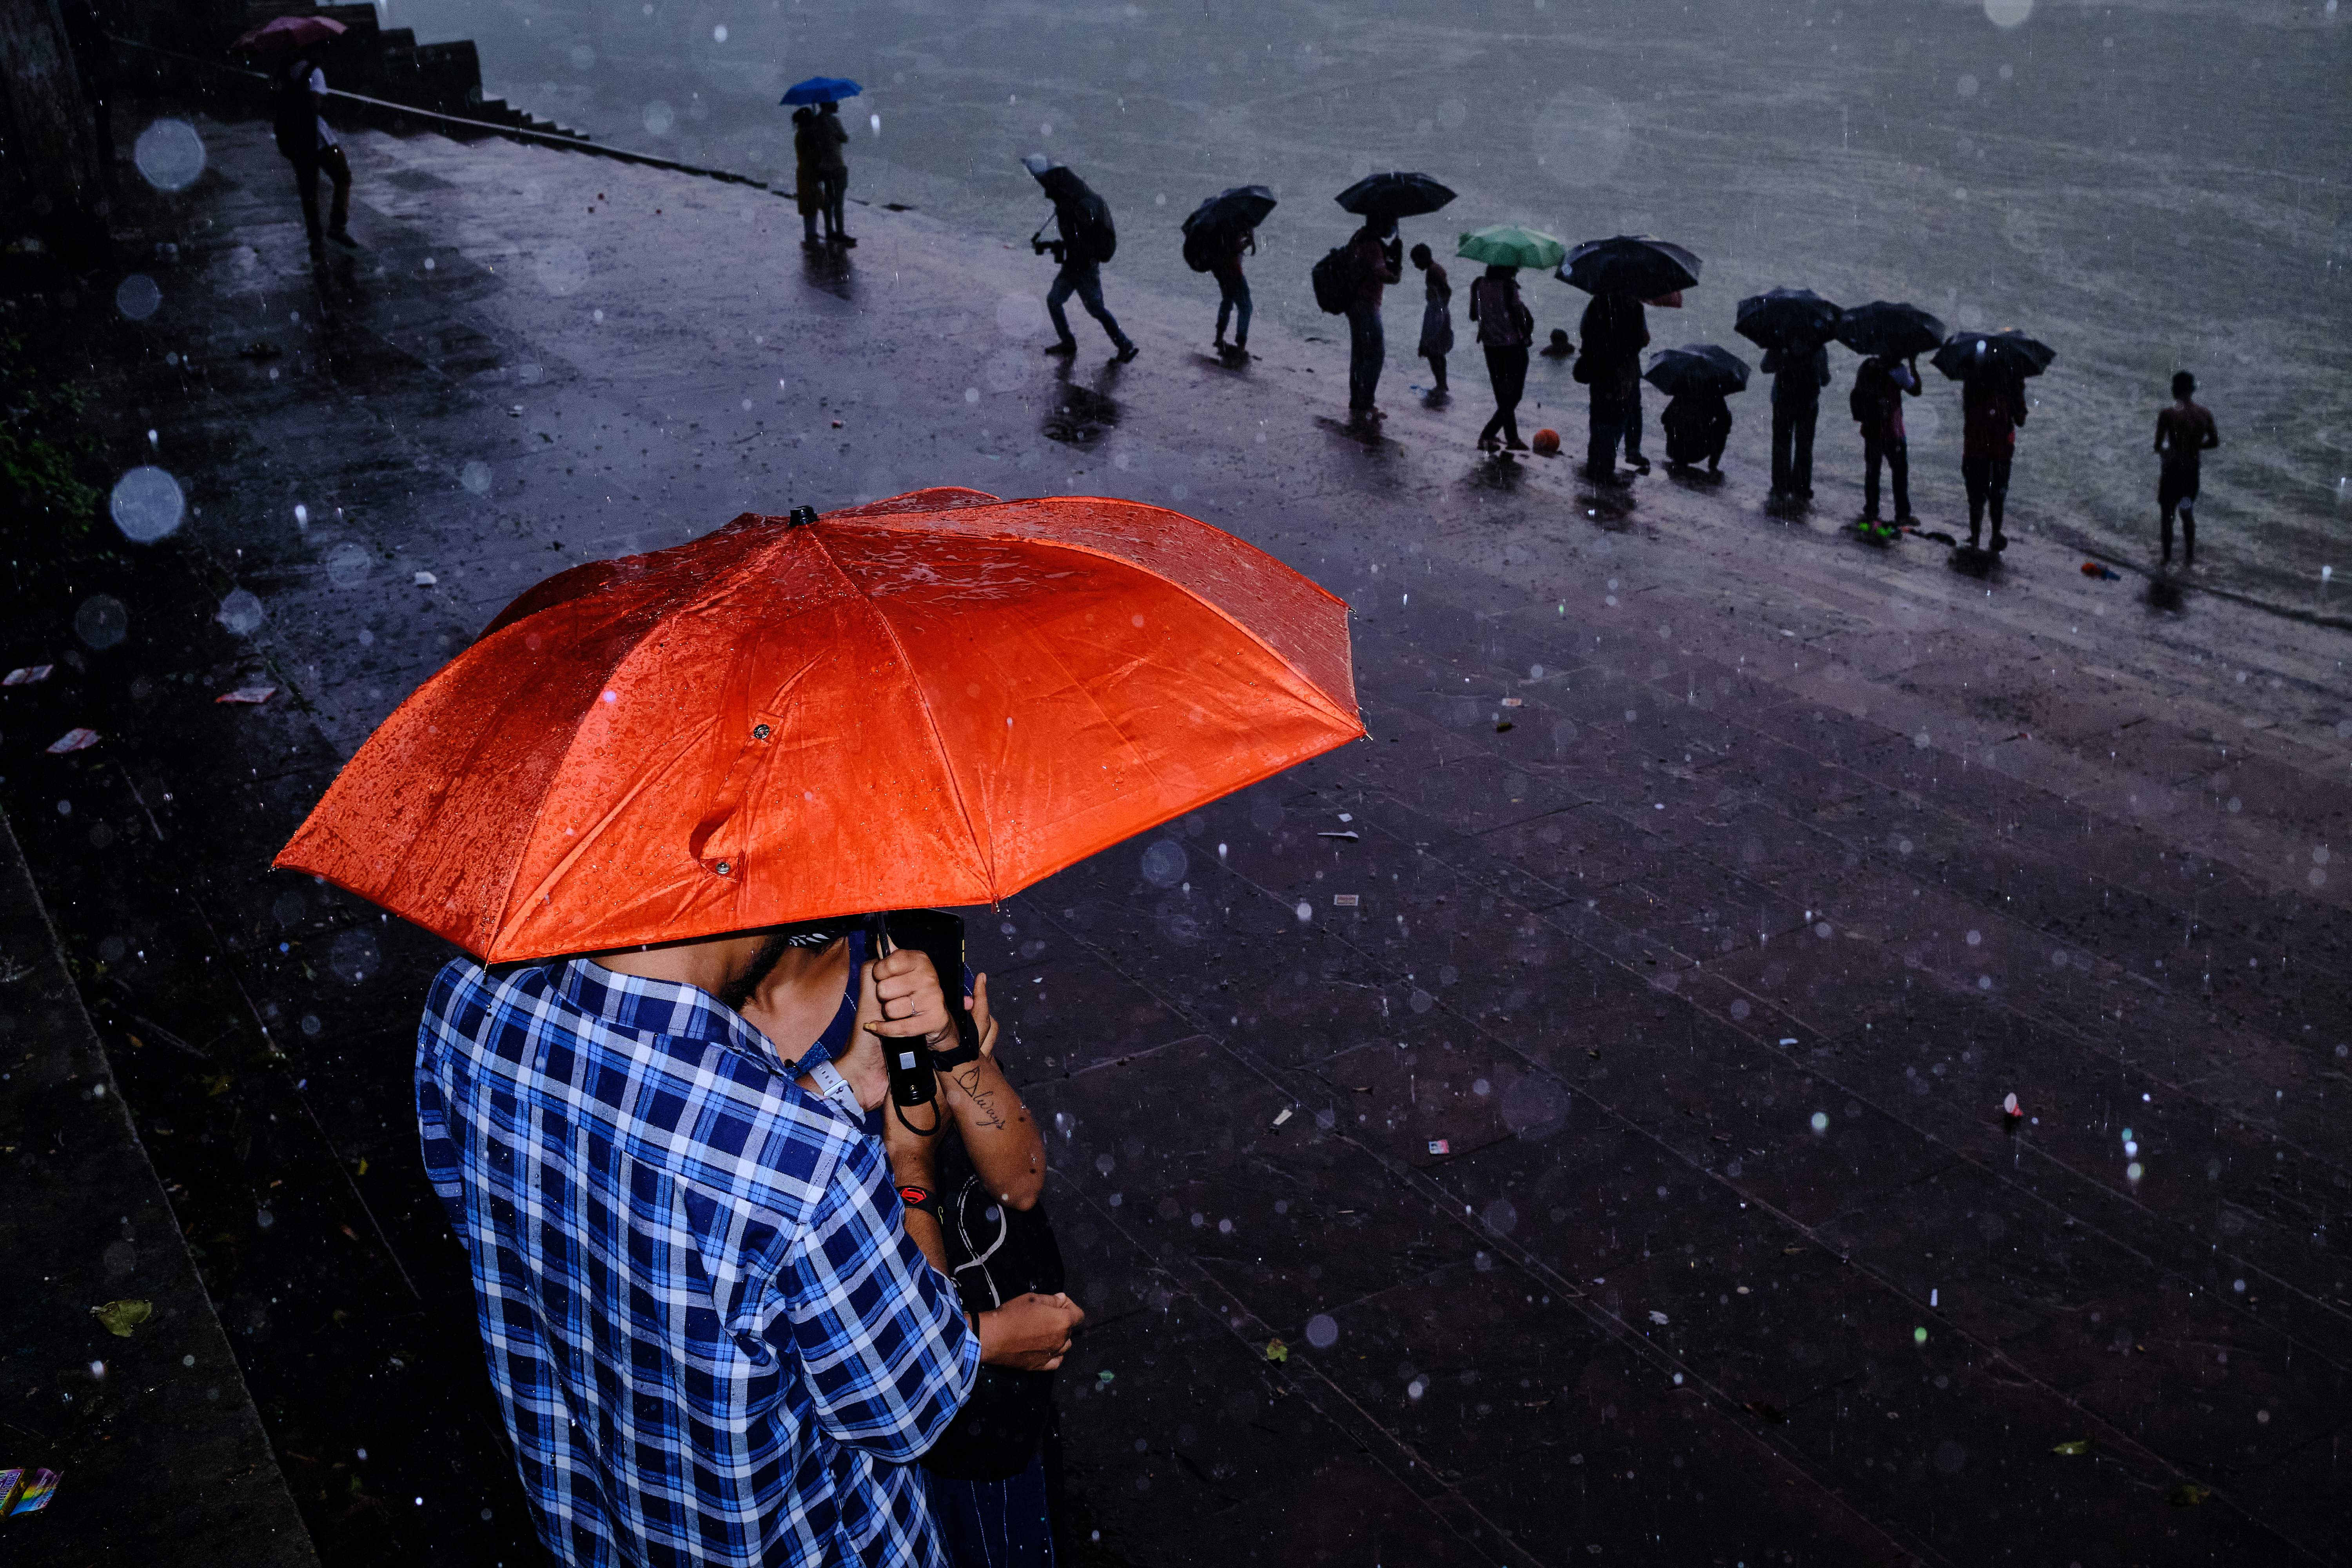 Monsoon in my city. "I took this picture in Kolkata, India. Whenever it rains, I love to use flash. I saw this couple having a moment away from the crowd in the heavy rain. I loved the orange umbrella, the colour stands out and in the background, people with umbrella creates an echo in the photograph. The internal flash was enough to create this dreamy effect in rain." © Subhran Karmakar, India, entry, Open Competition, Street Photography, 2023 Sony World Photography Awards